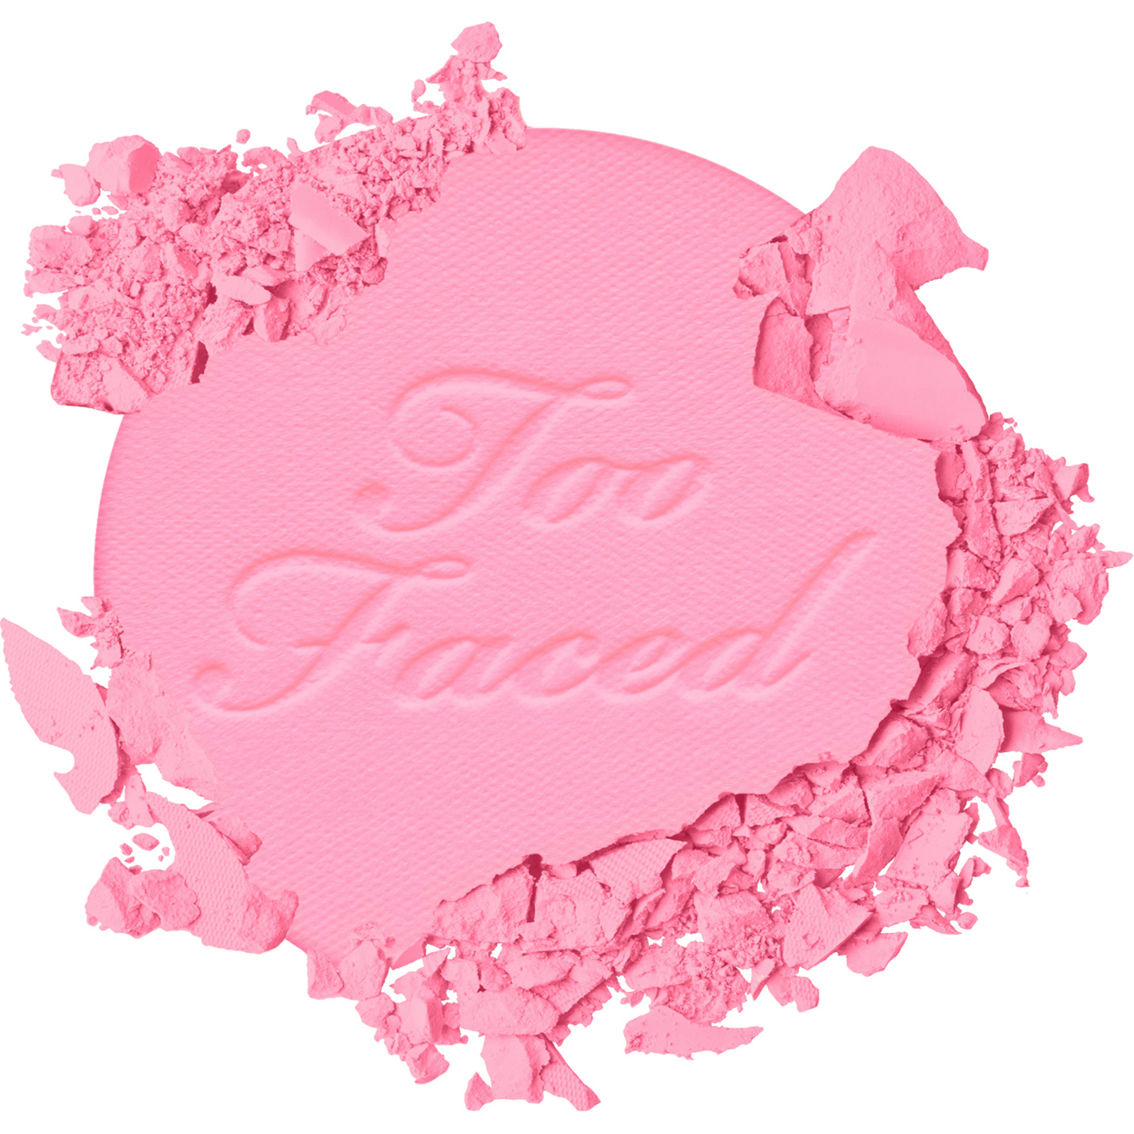 Too Faced Cloud Crush Blush - Image 2 of 6